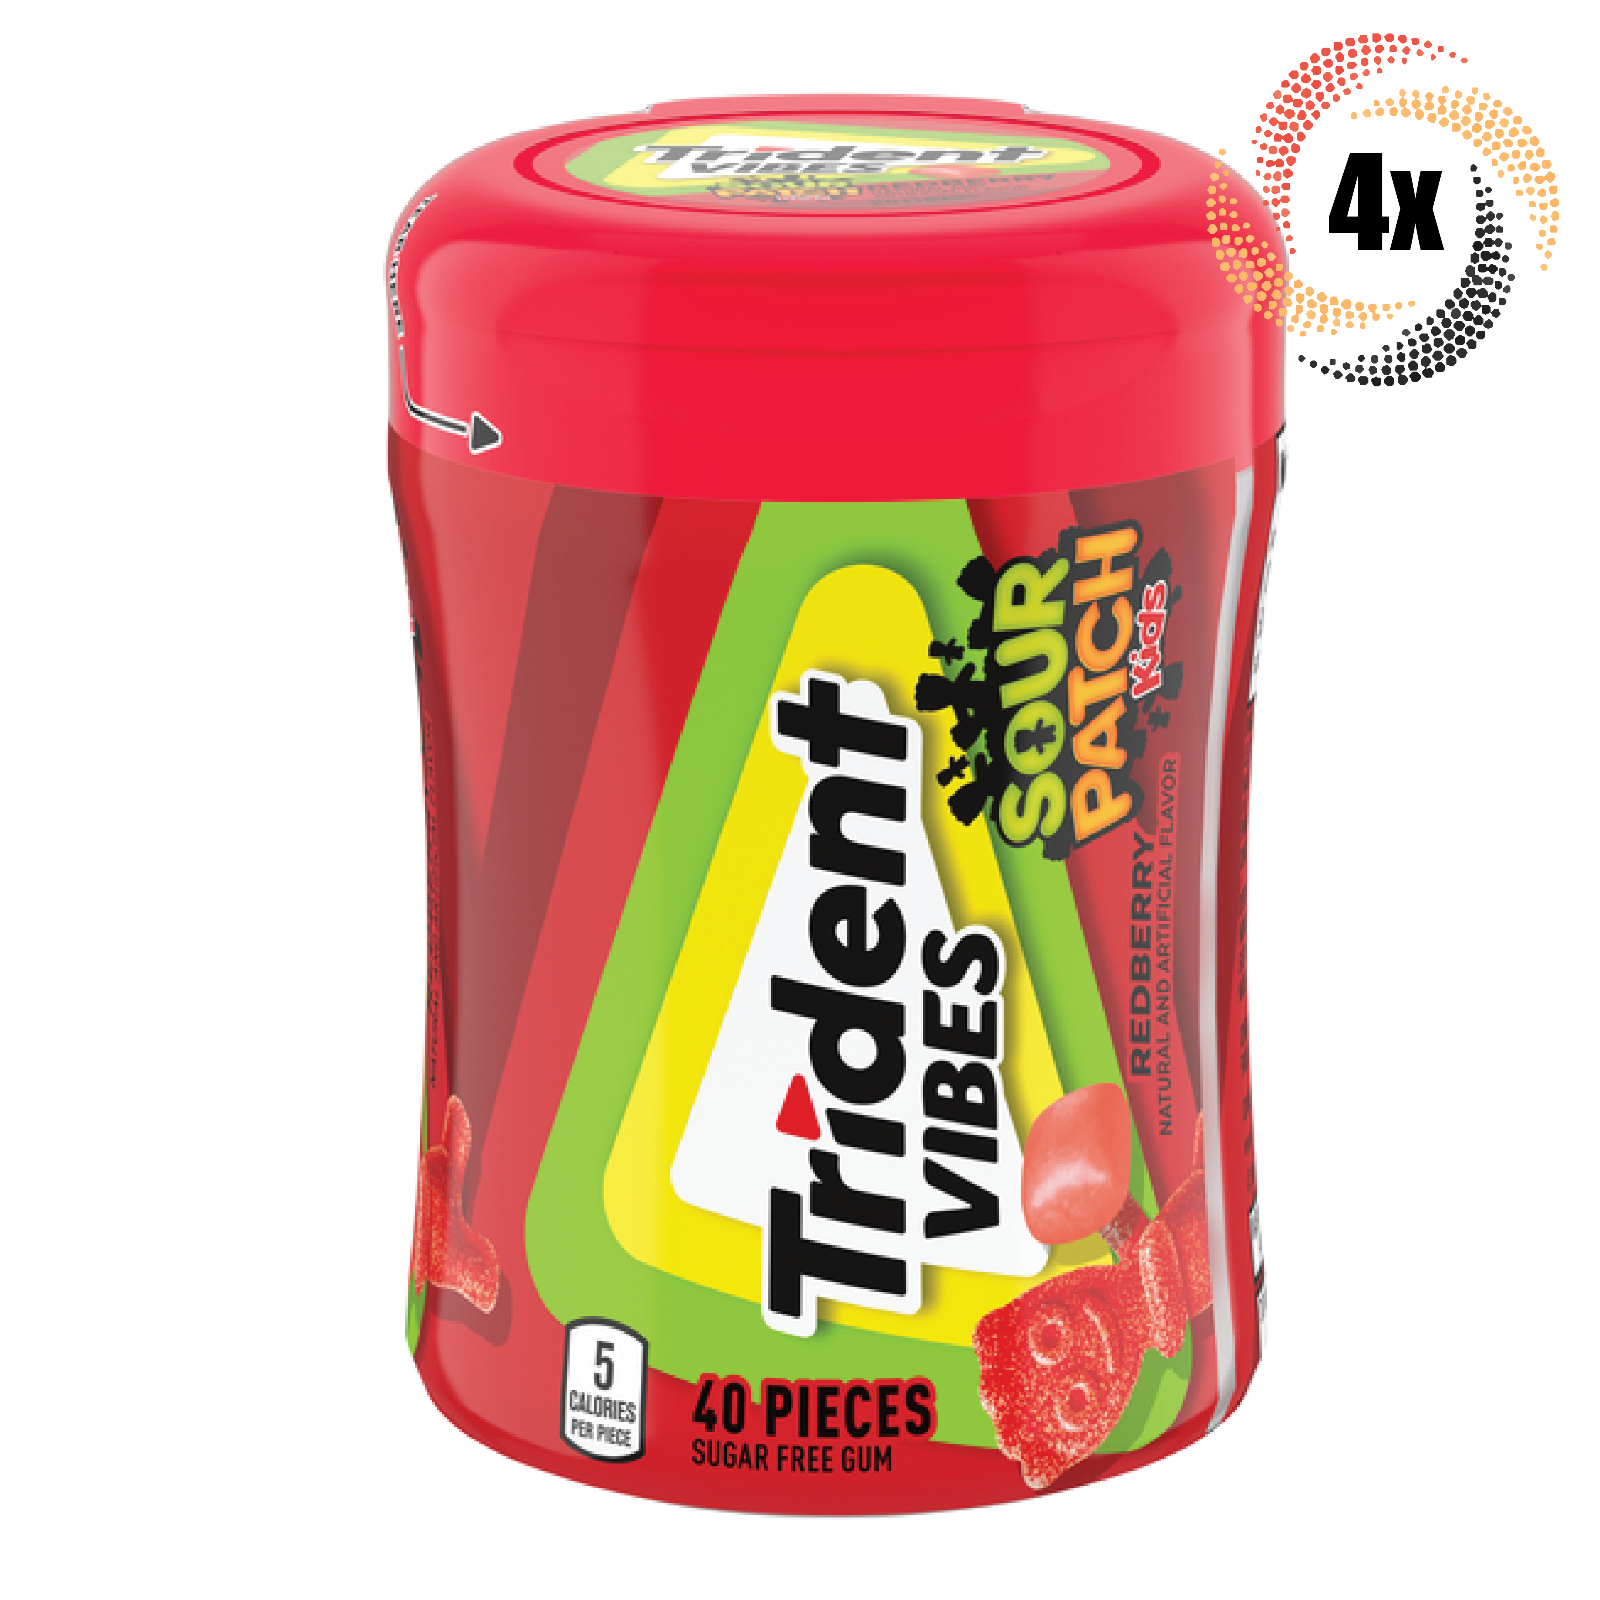 Primary image for 4x Bottles Trident Vibes Sour Patch Kids Redberry Flavor Gum | 40 Pieces Each